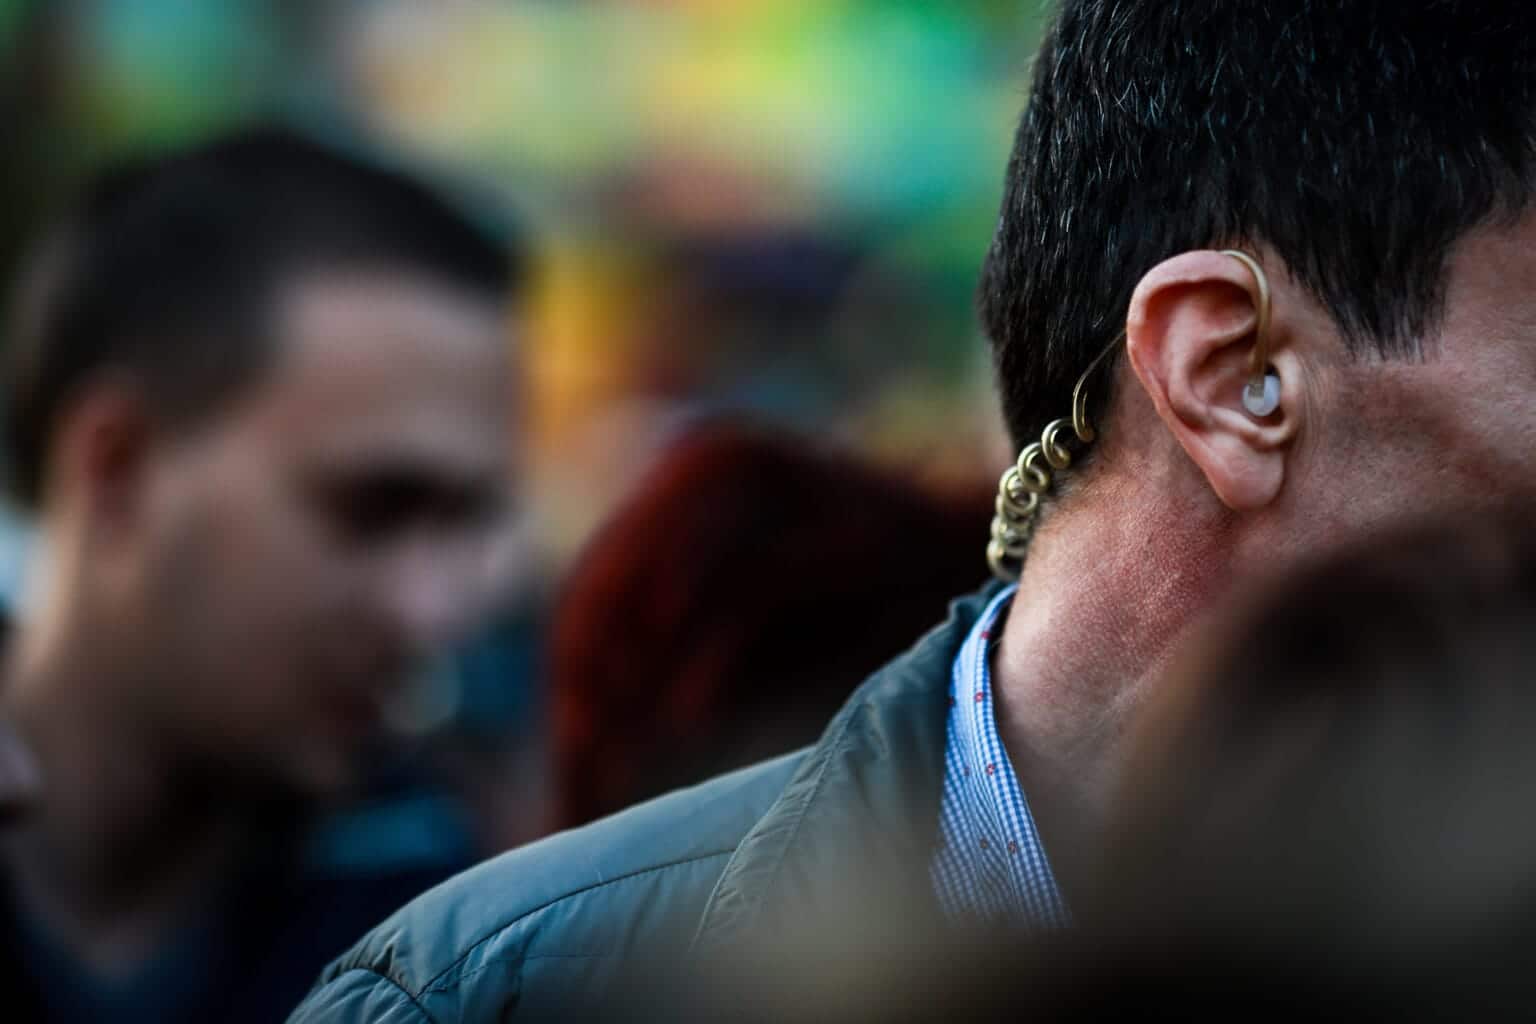 Close-up of a man's ear wearing a hearing aid with blurred faces in the background.